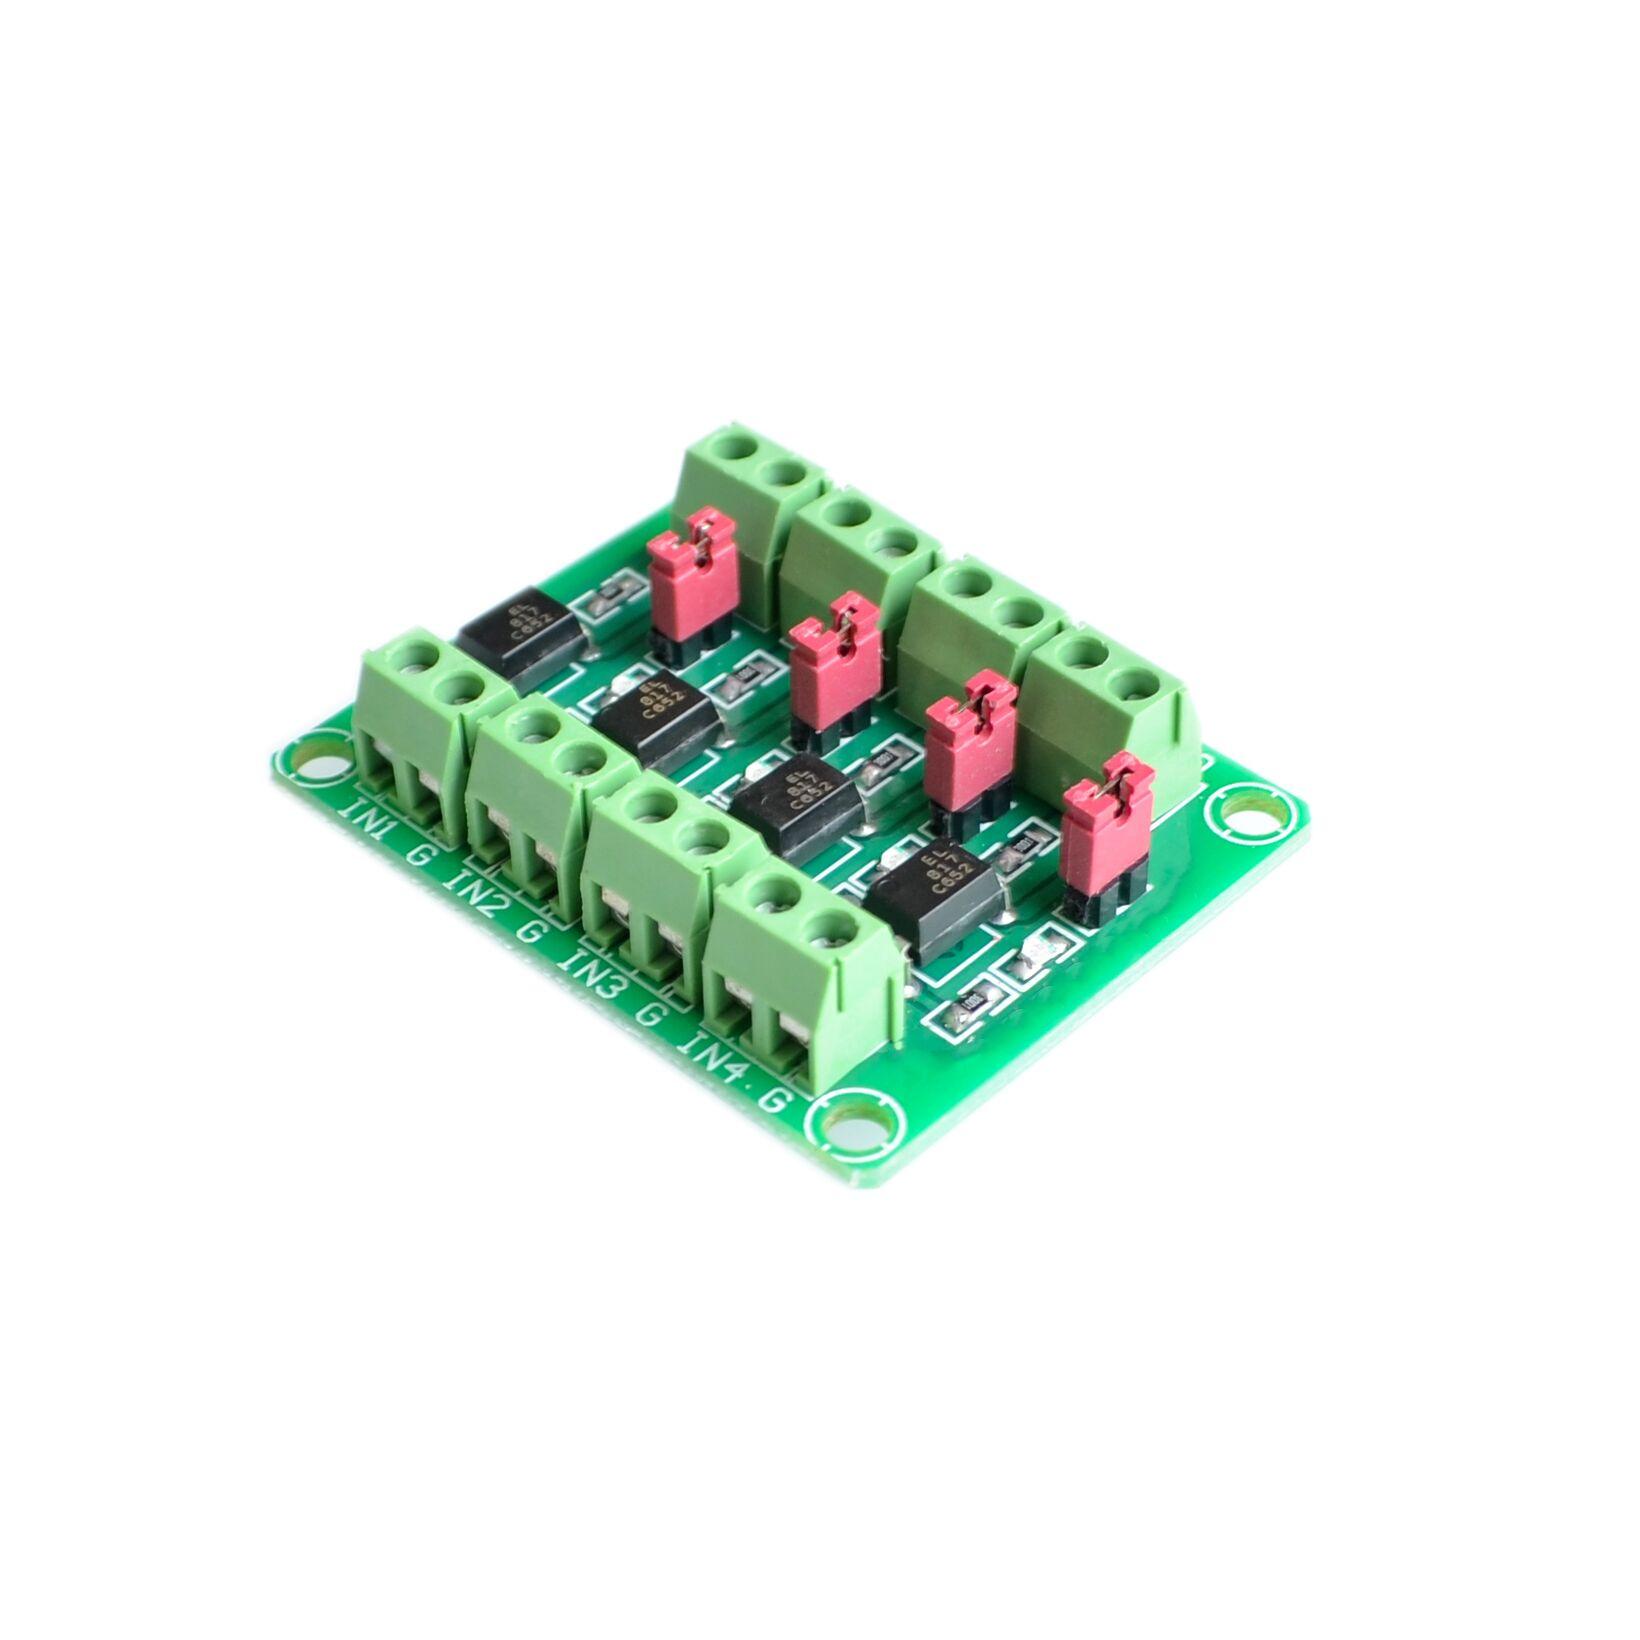 10PCS/LOT PC817 4 Channel Optocoupler Isolation Board Voltage Converter Adapter Module 3.6-30V Driver Photoelectric Isolated